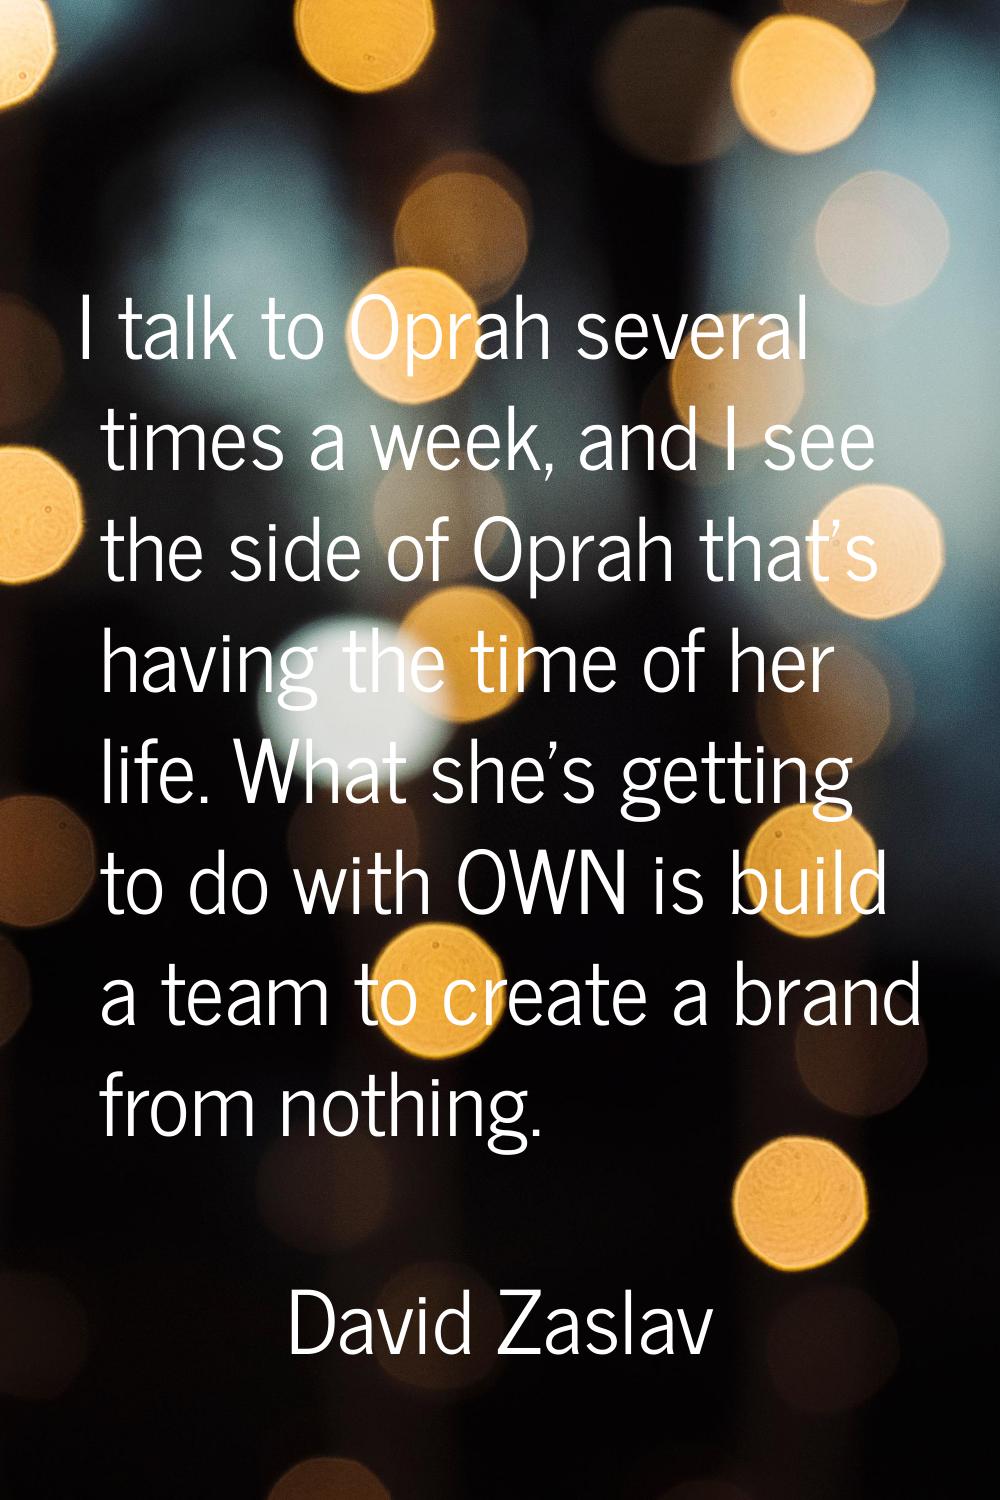 I talk to Oprah several times a week, and I see the side of Oprah that's having the time of her lif